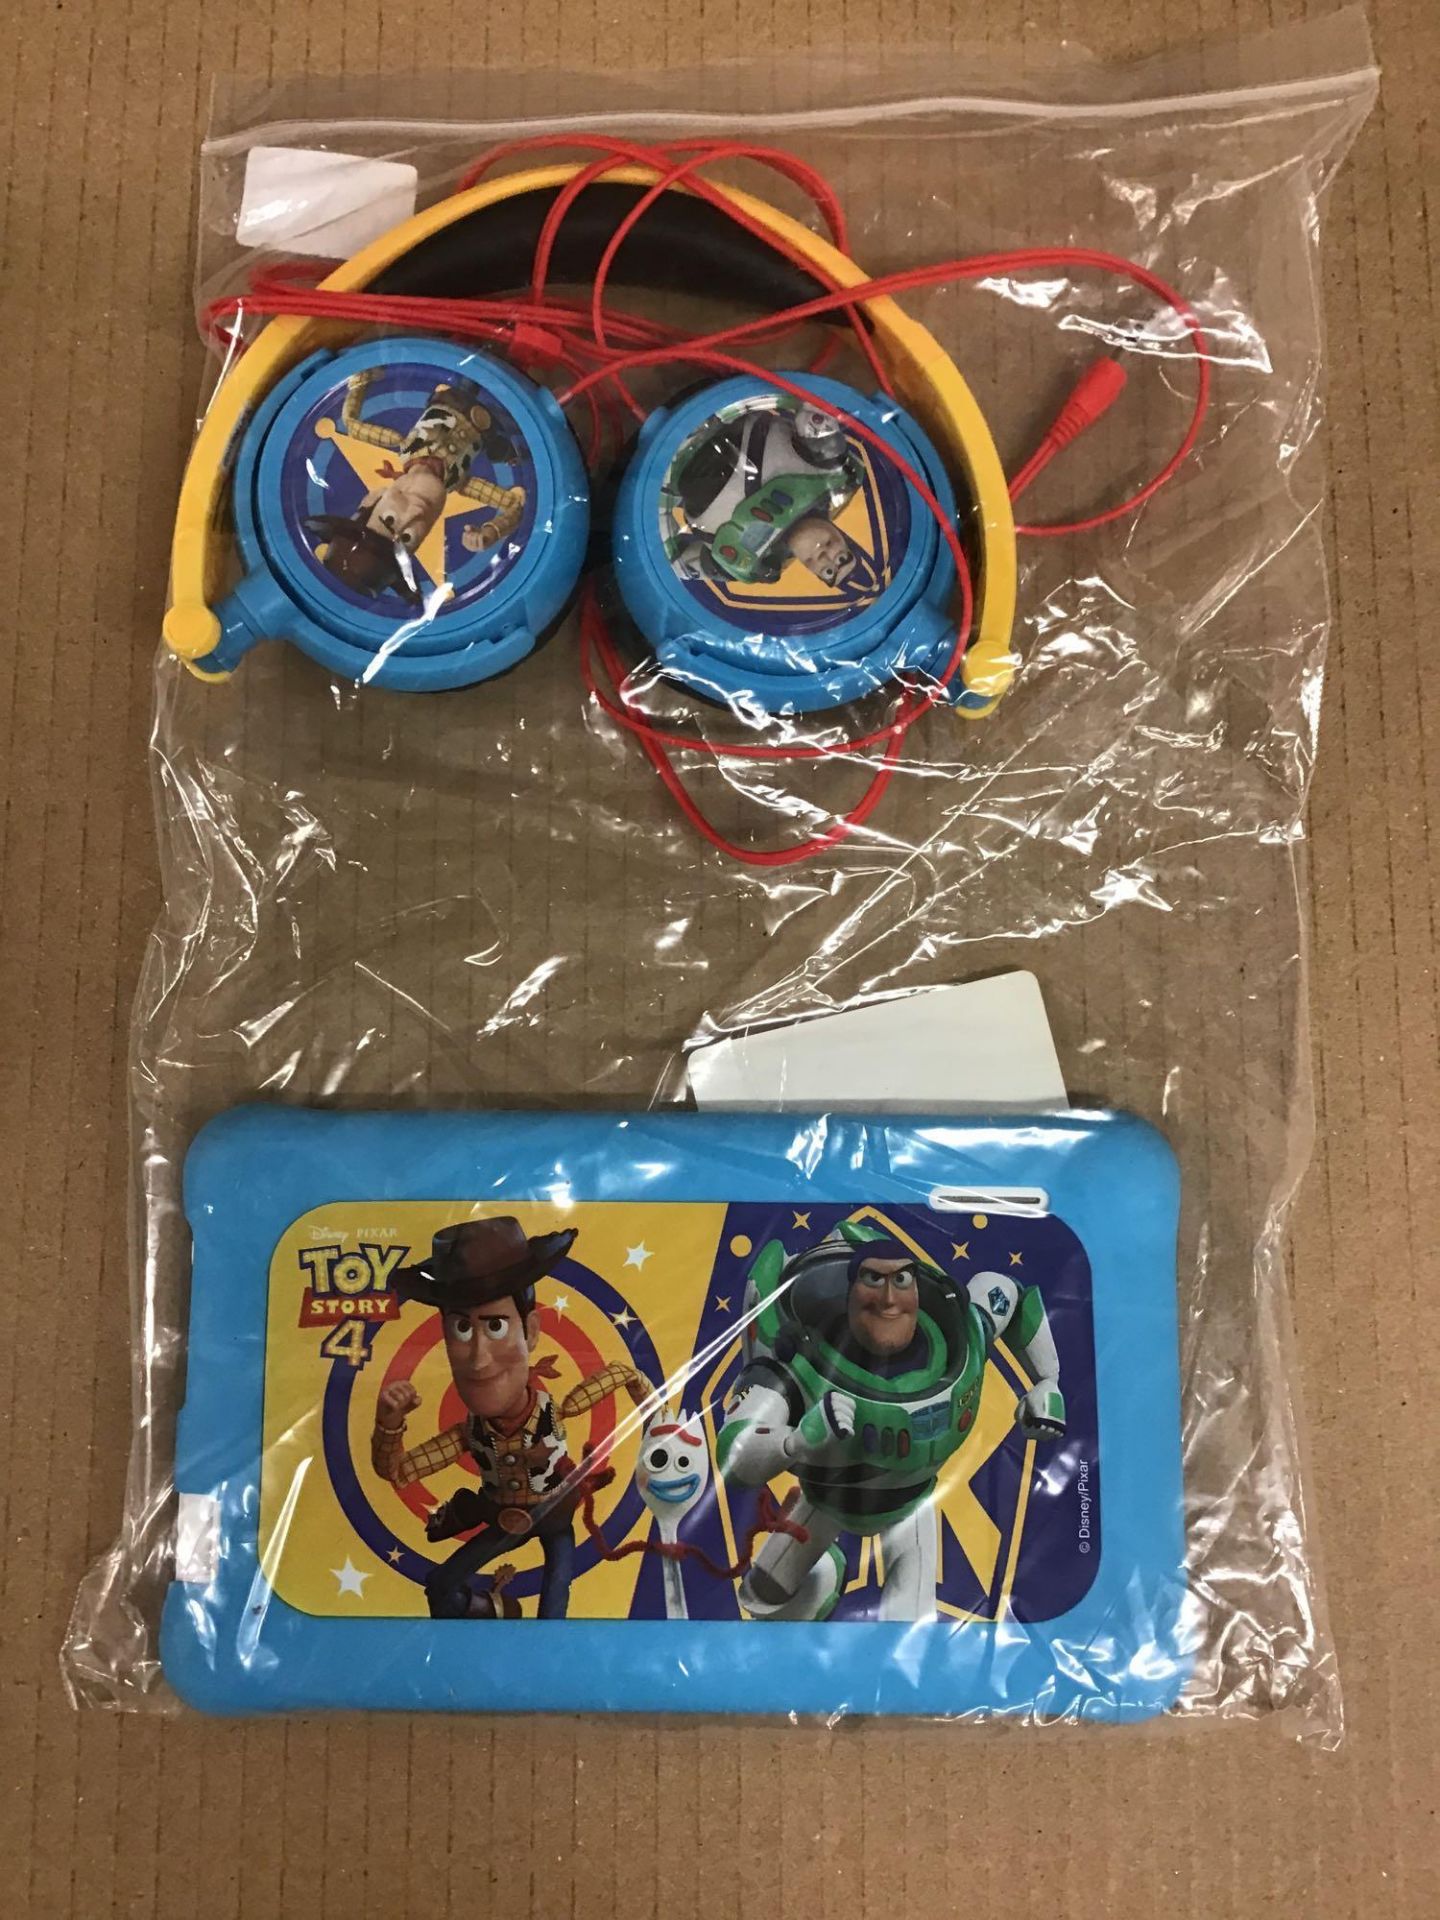 LexiTab Master 7' Kids Tablet Disney Toy Story 4 Case and Headphone - £55.00 RRP - Image 3 of 5